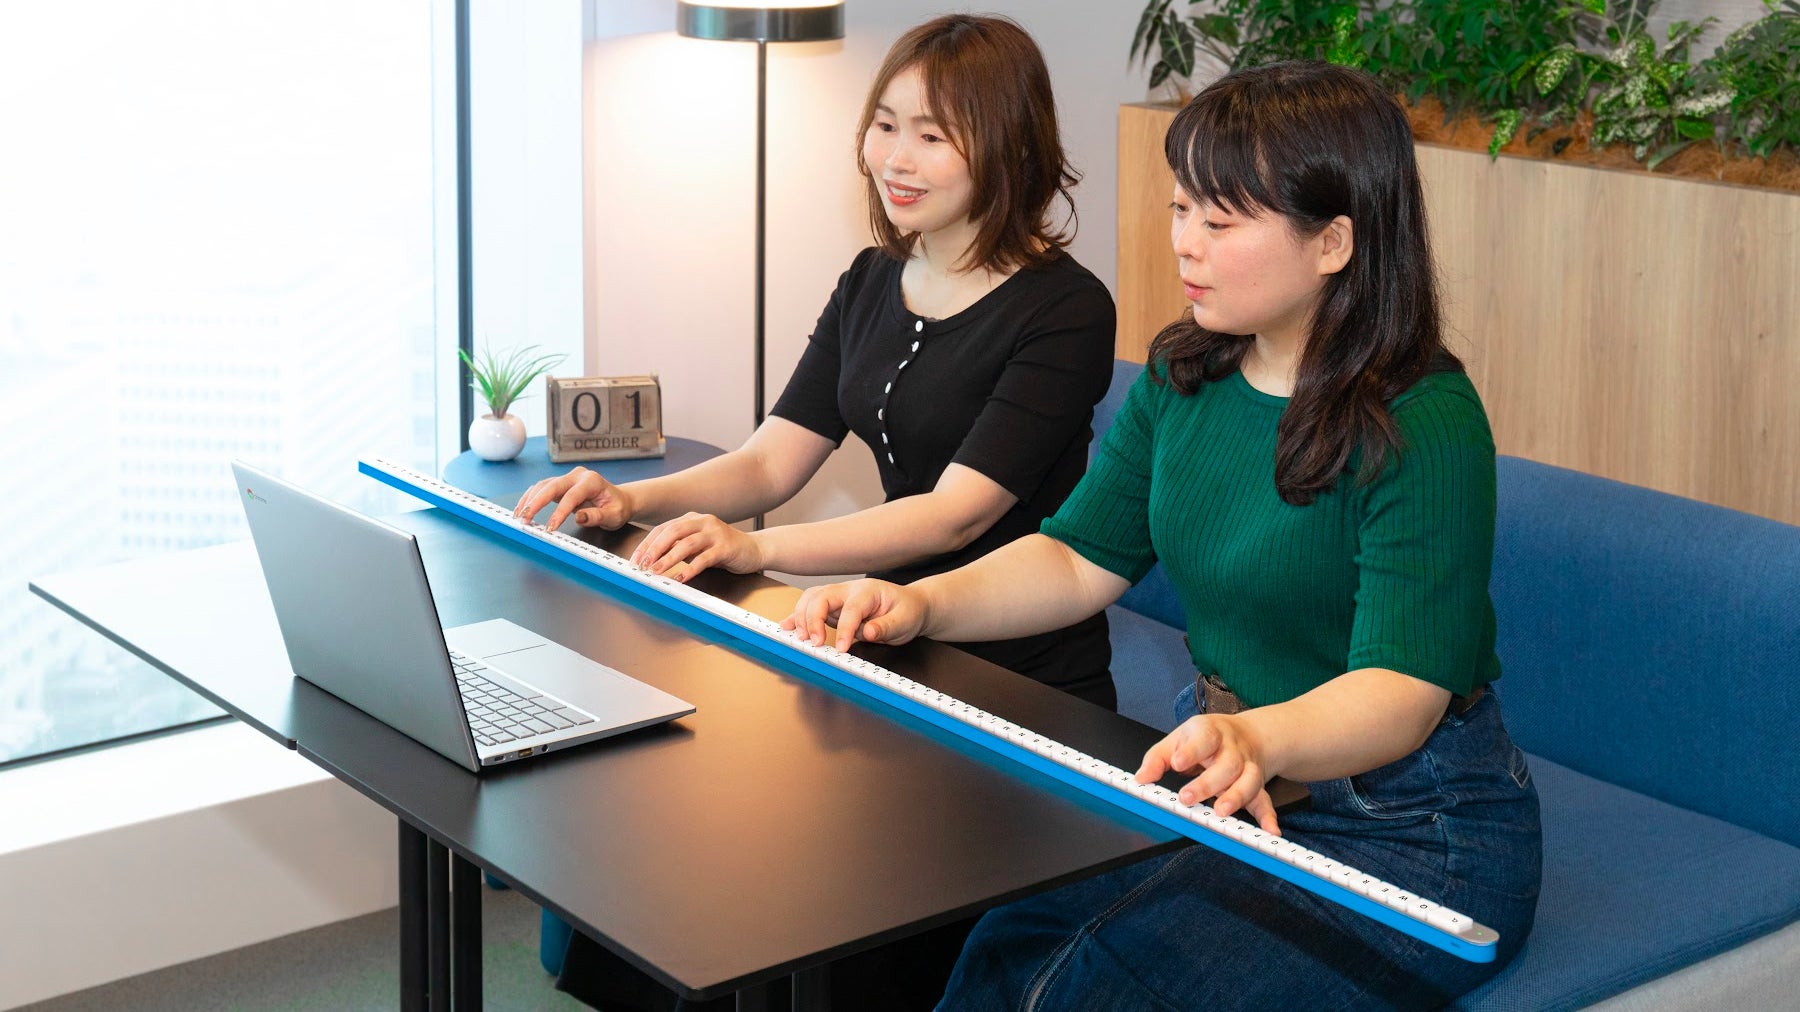 Google Japan Puts Entire Keyboard on One Long Stick